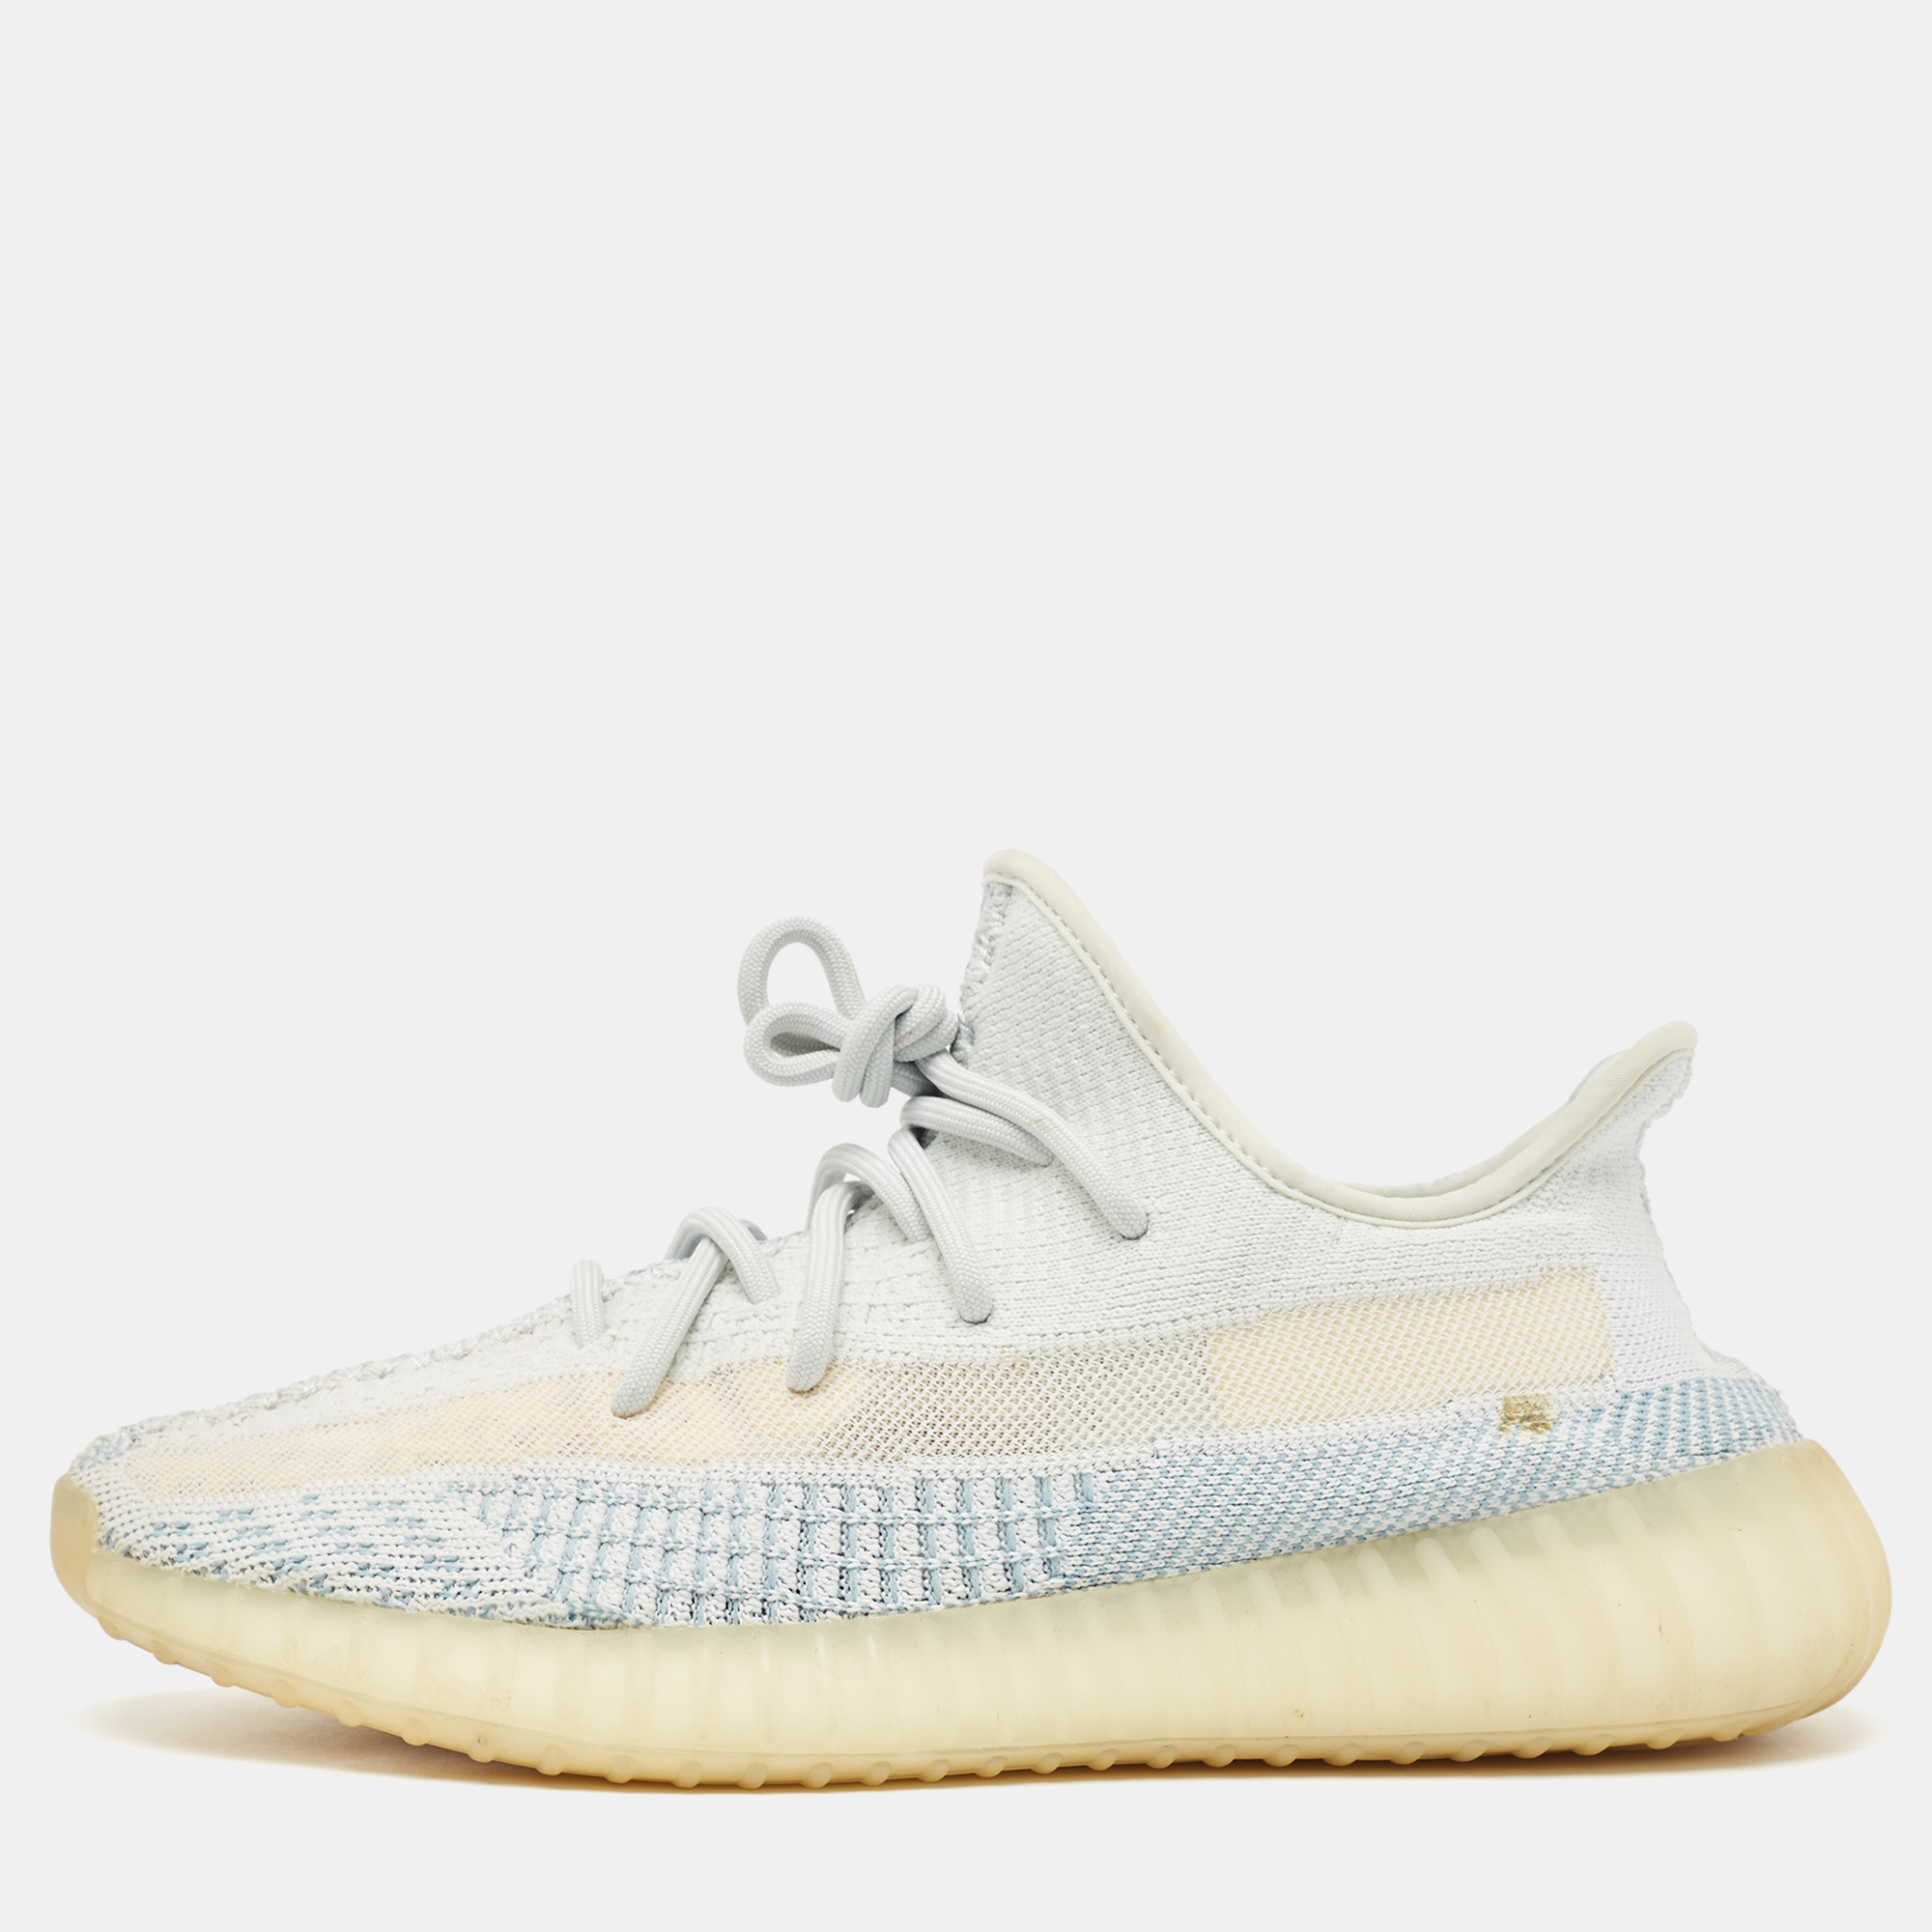 

Yeezy x Adidas Blue/White Knit Fabric Boost 350 V2 Cloud White Non Reflective Sneakers Size 43 1/3